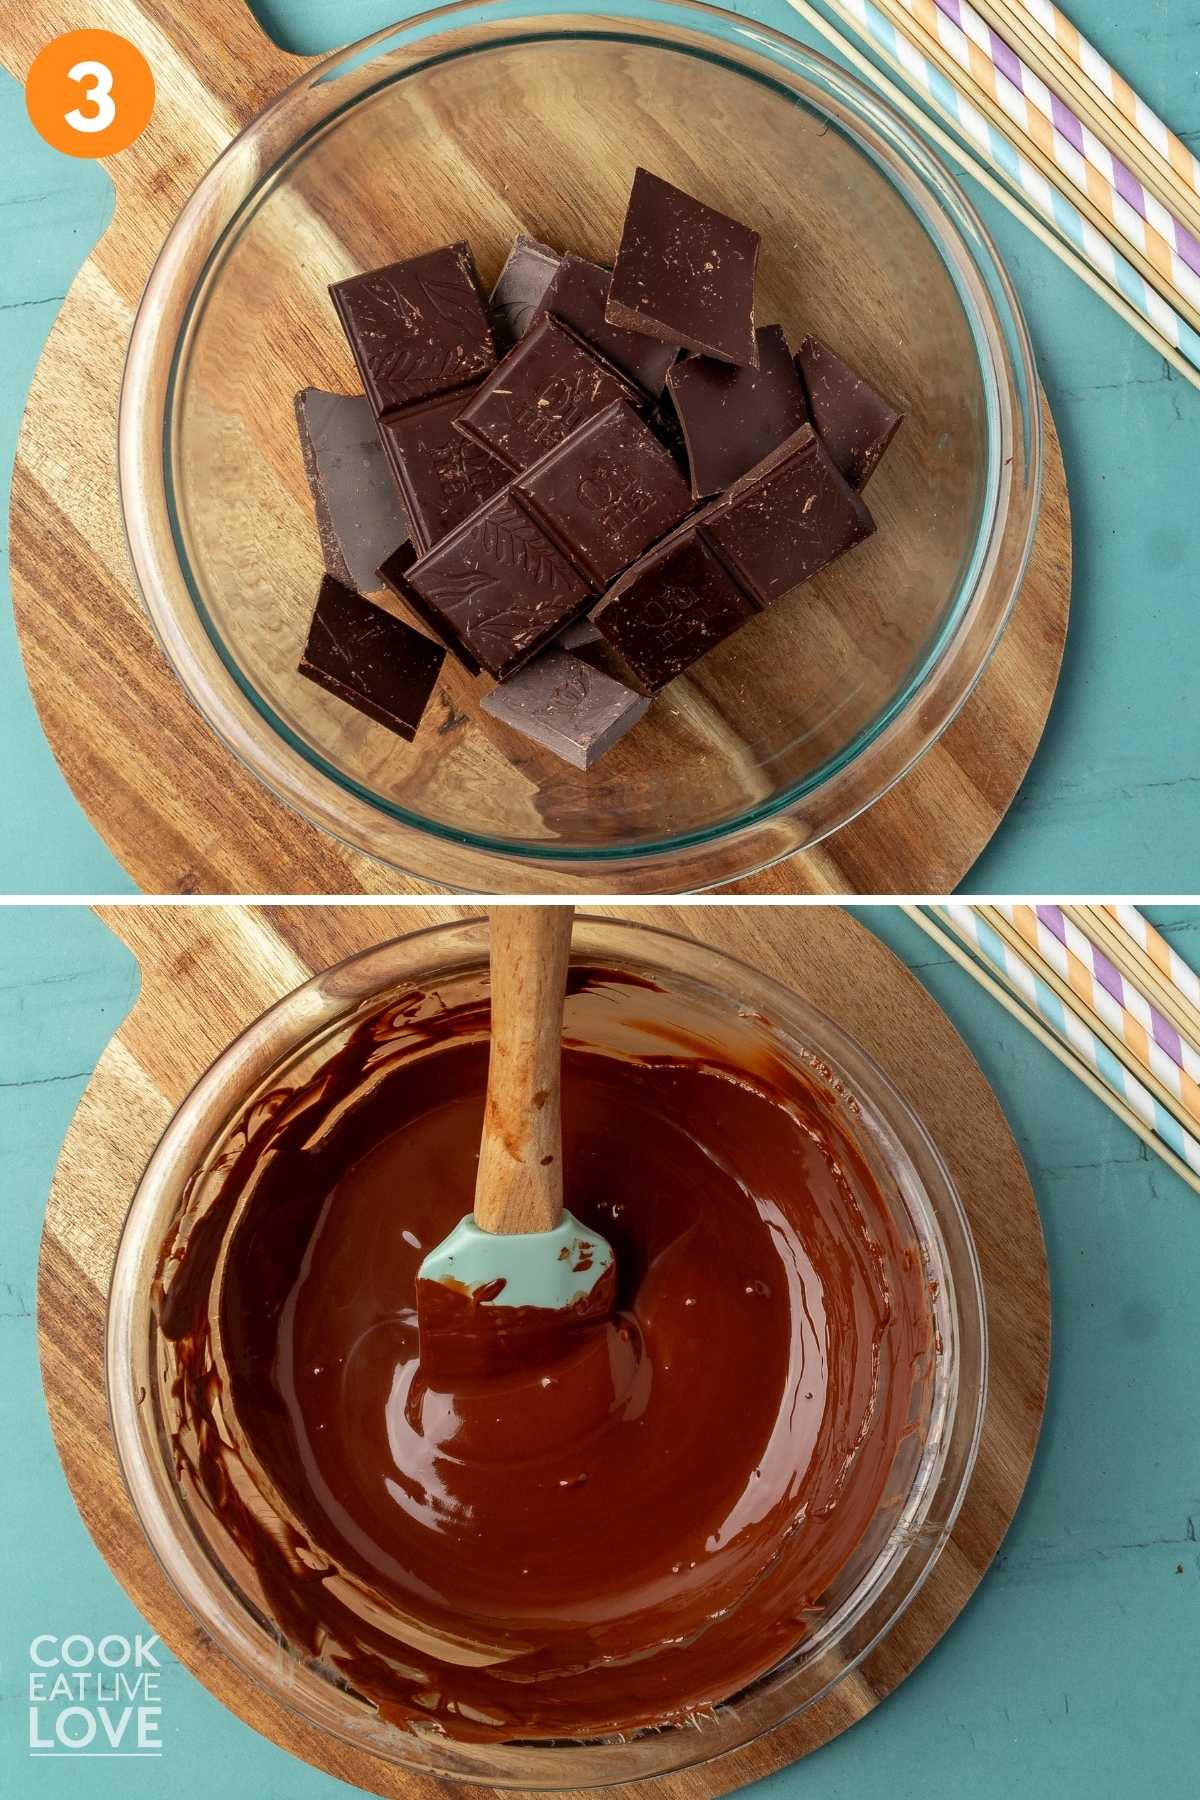 Chocolate bar broken up in a bowl and then melted.